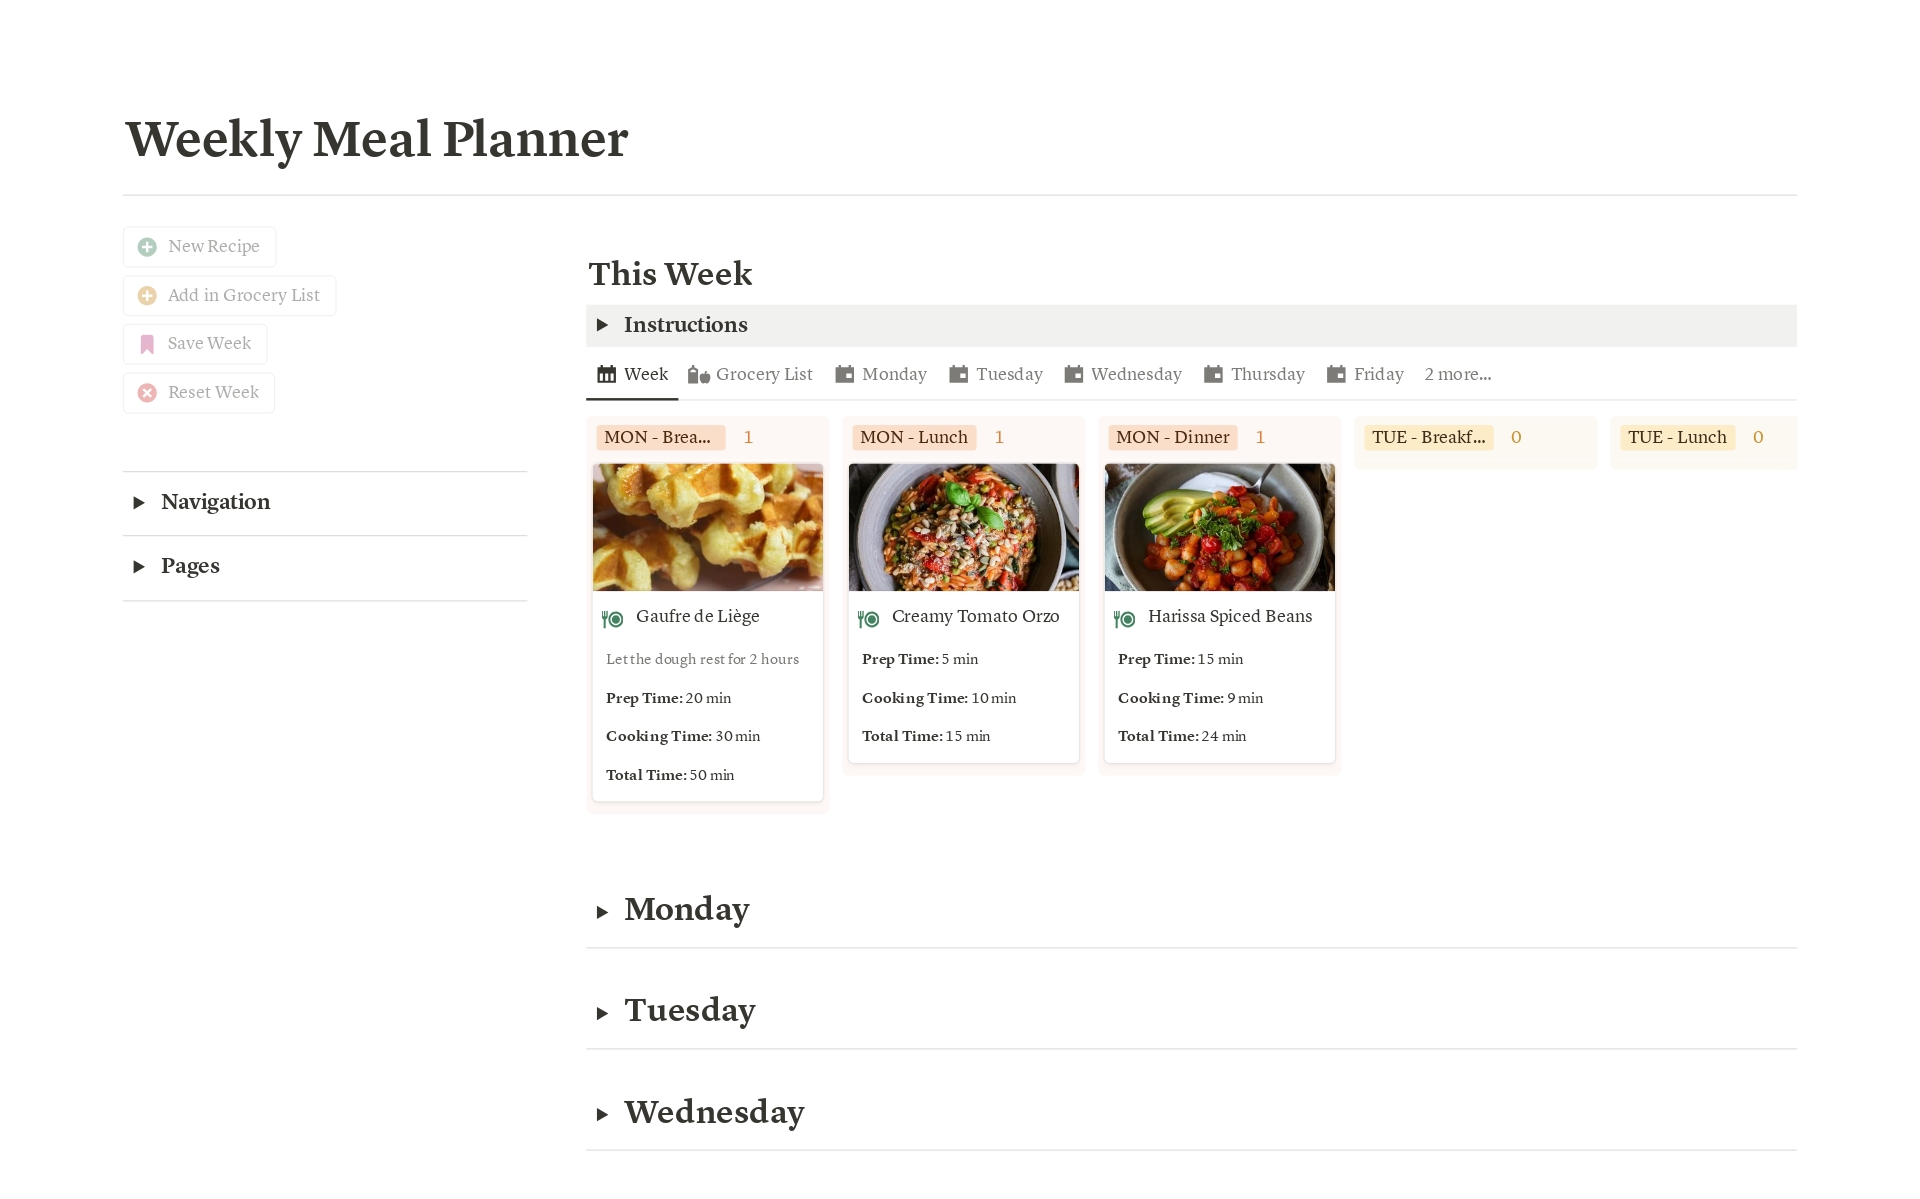 Eat better and save time and money by planning your week’s meals in just a few minutes. And it’s very easy-to-use with a simple drag and drop feature.